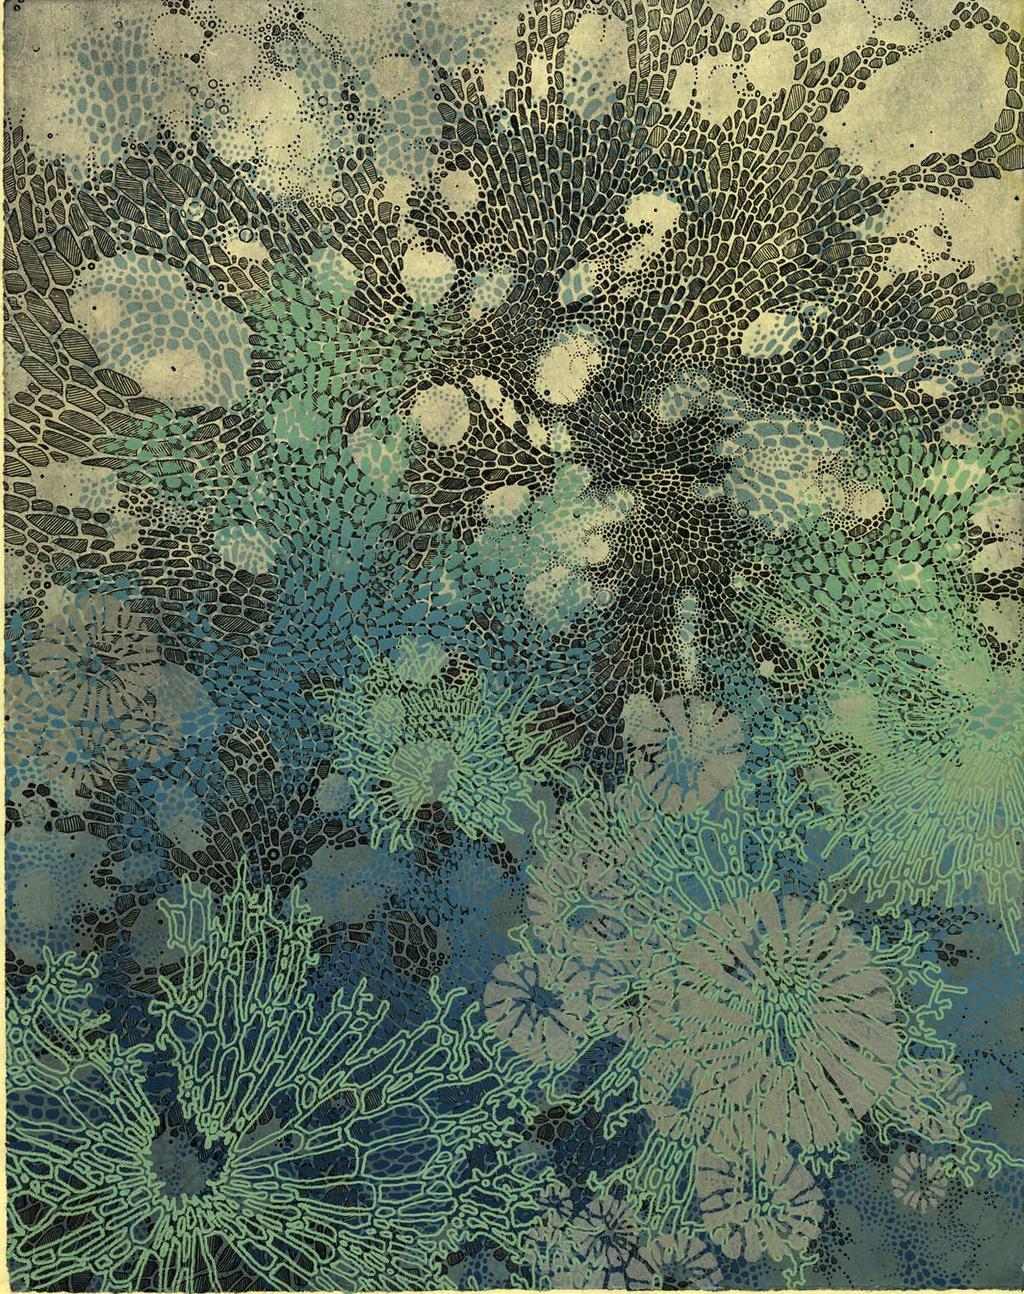 American artist, Lauren, has been inspired by the sea to create work that is extraordinary, unique and meticulous, capturing in printmaking and printstallations the intricate beauty and poetry of